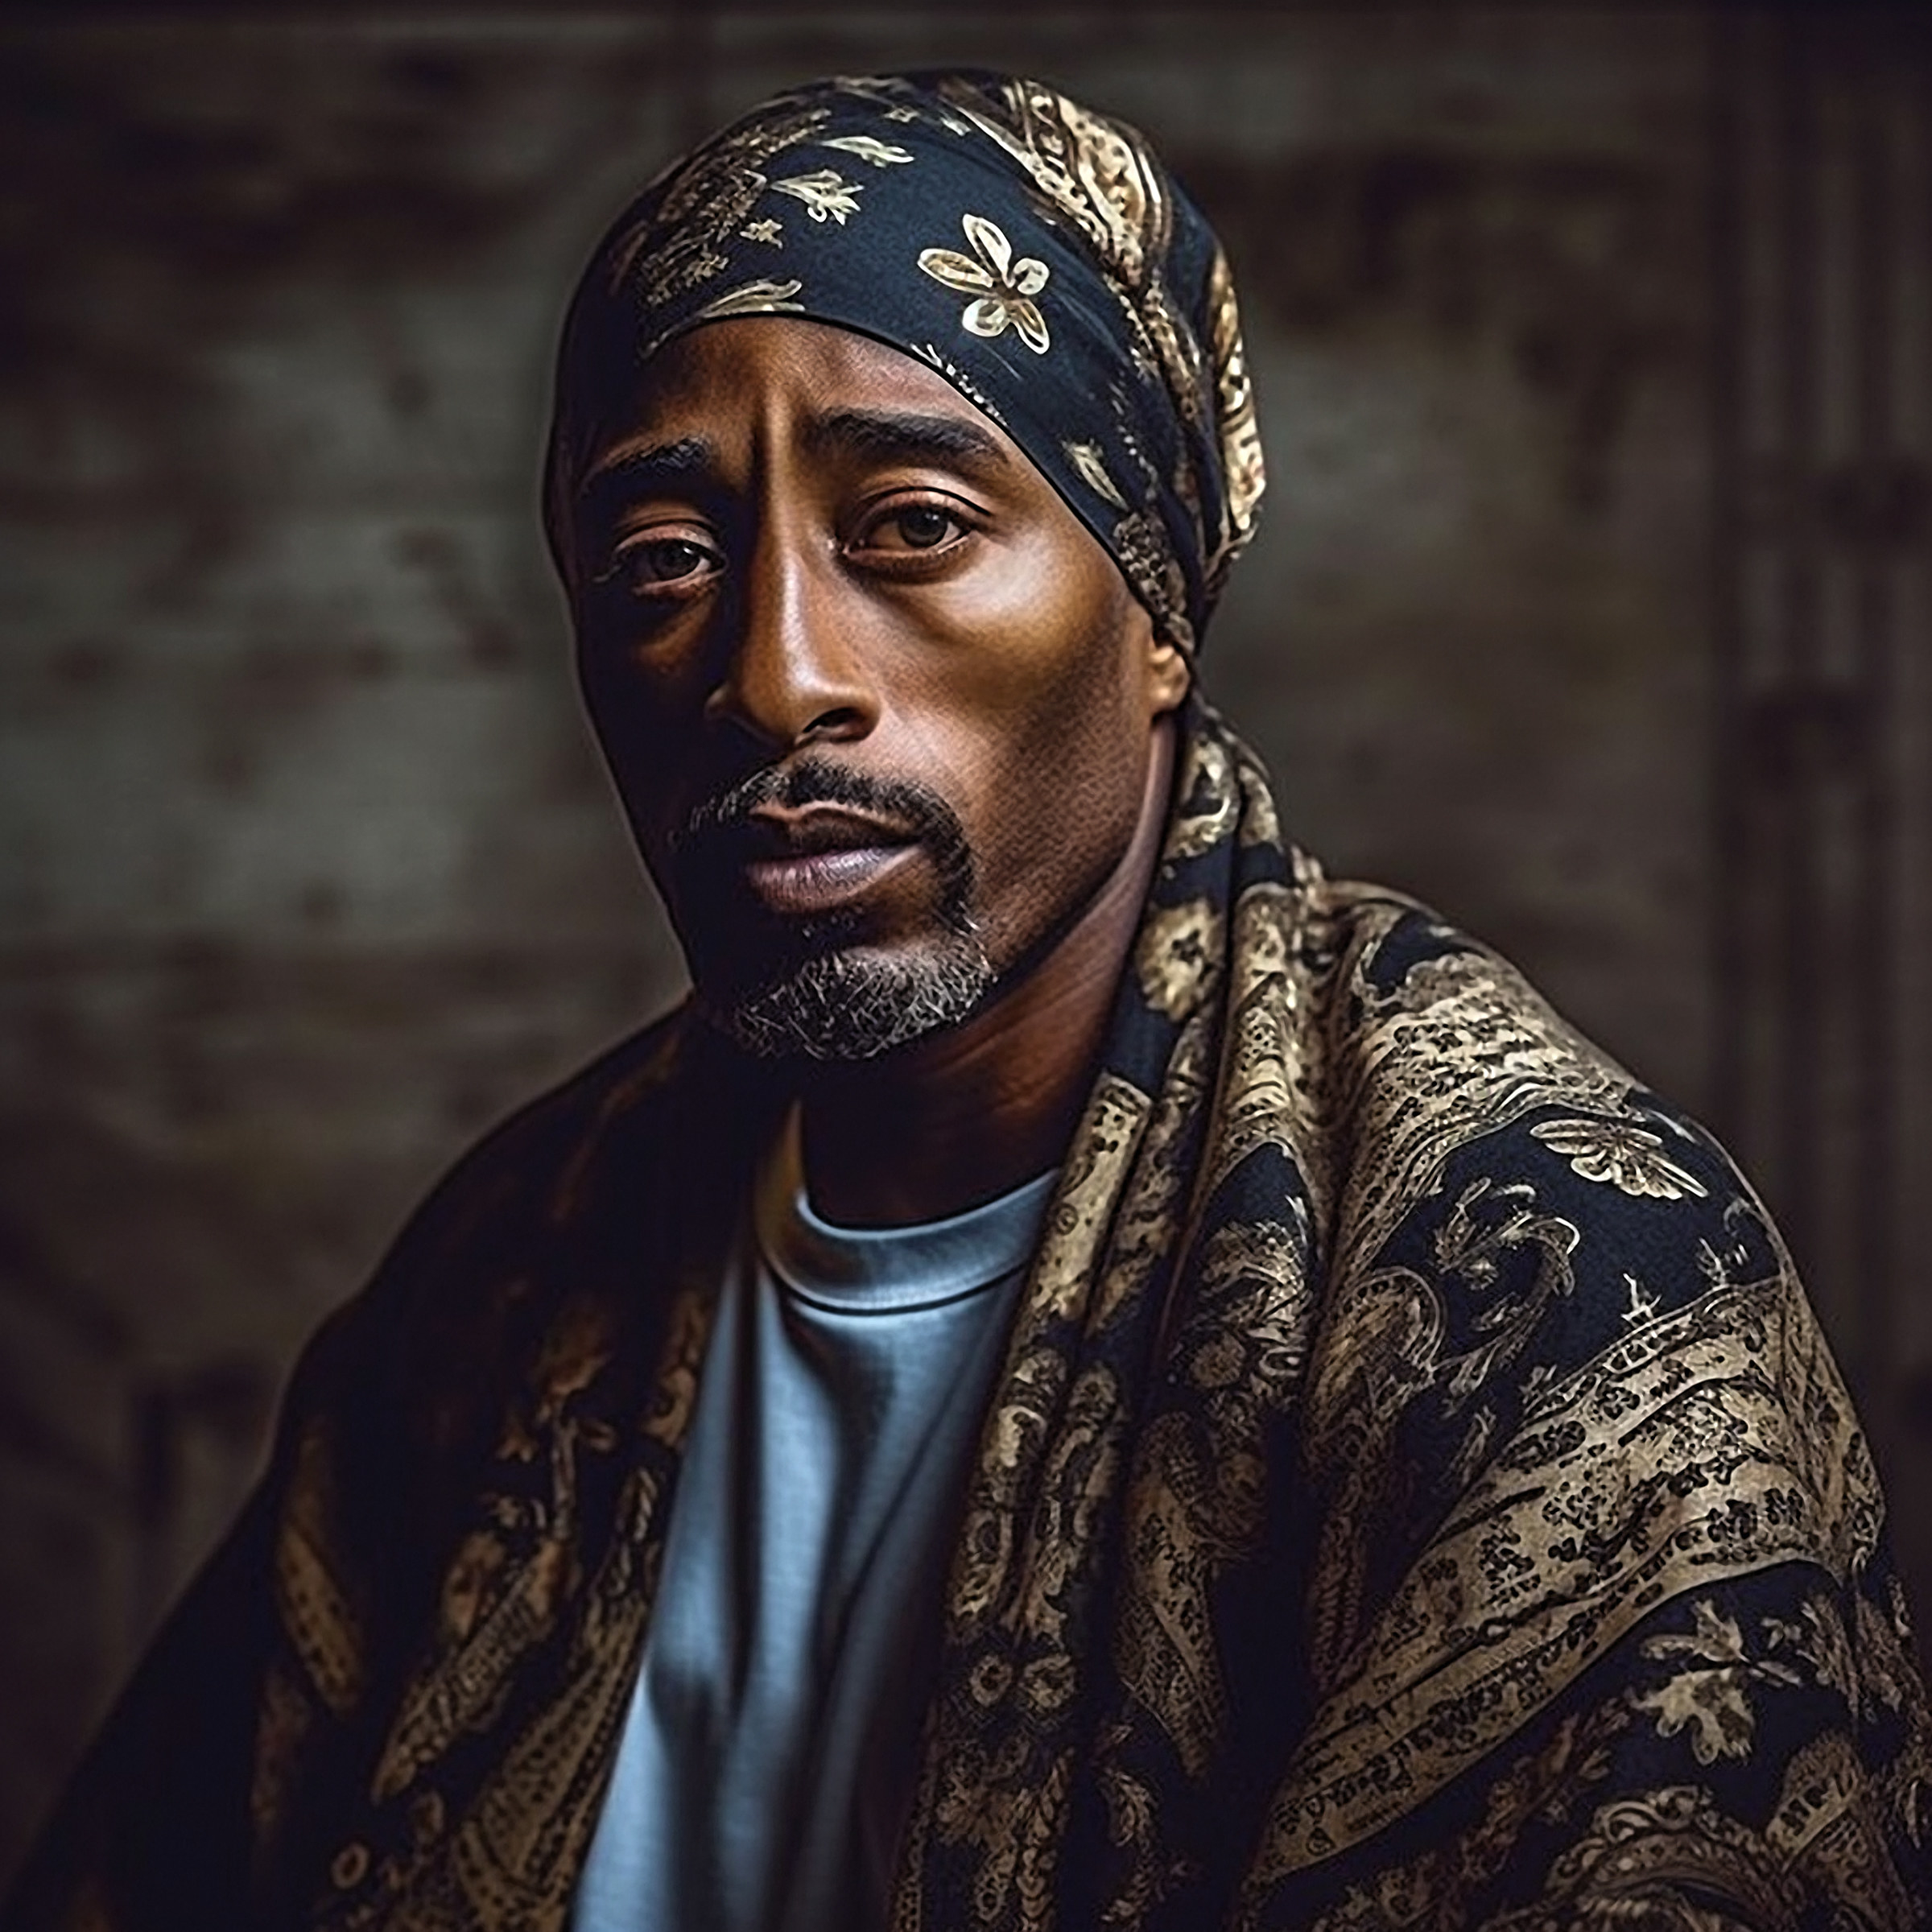 Tupac imagined as an older person